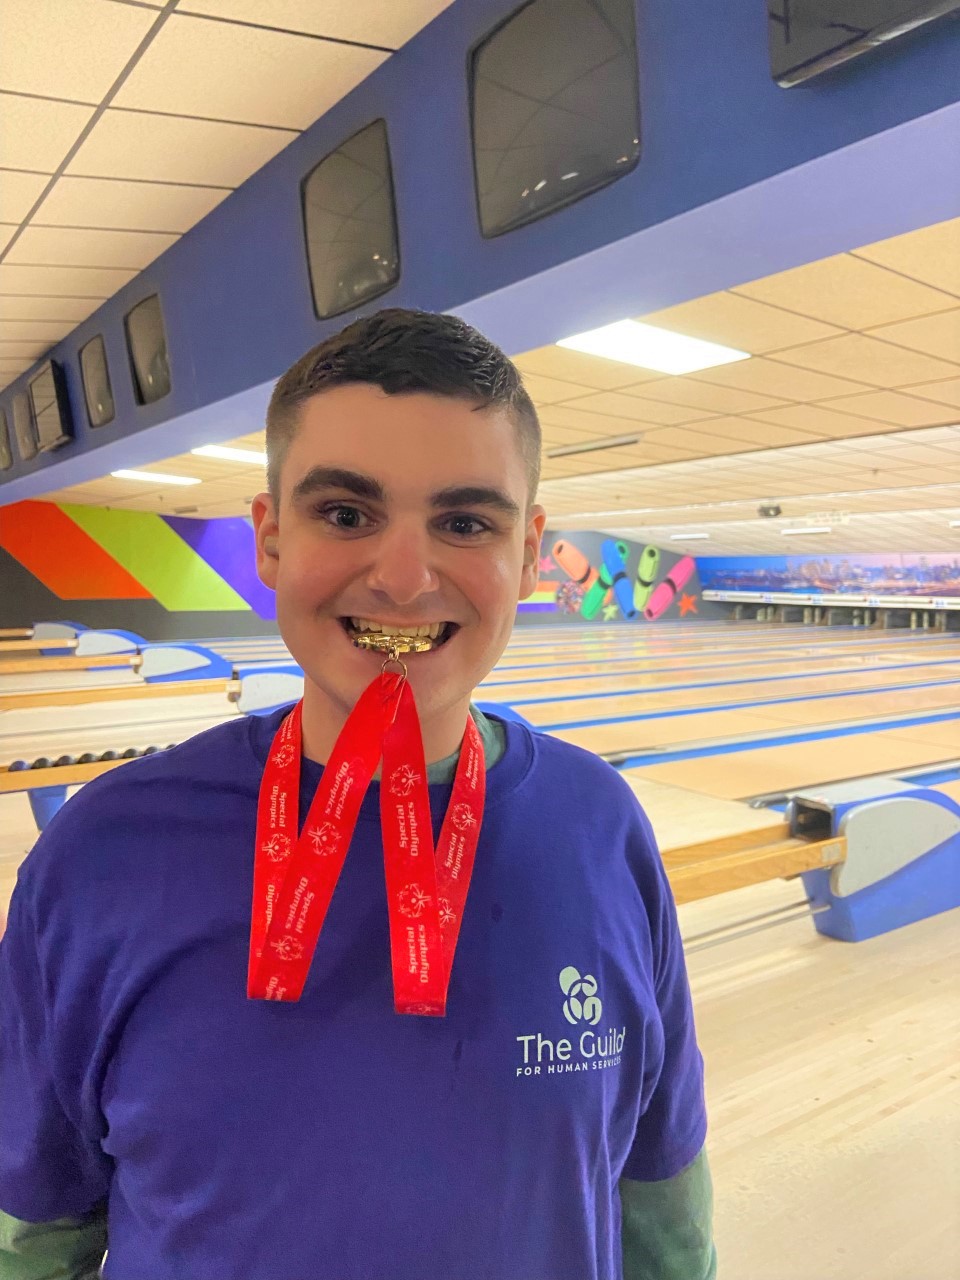 Guild student at Special Olympics bowling competition